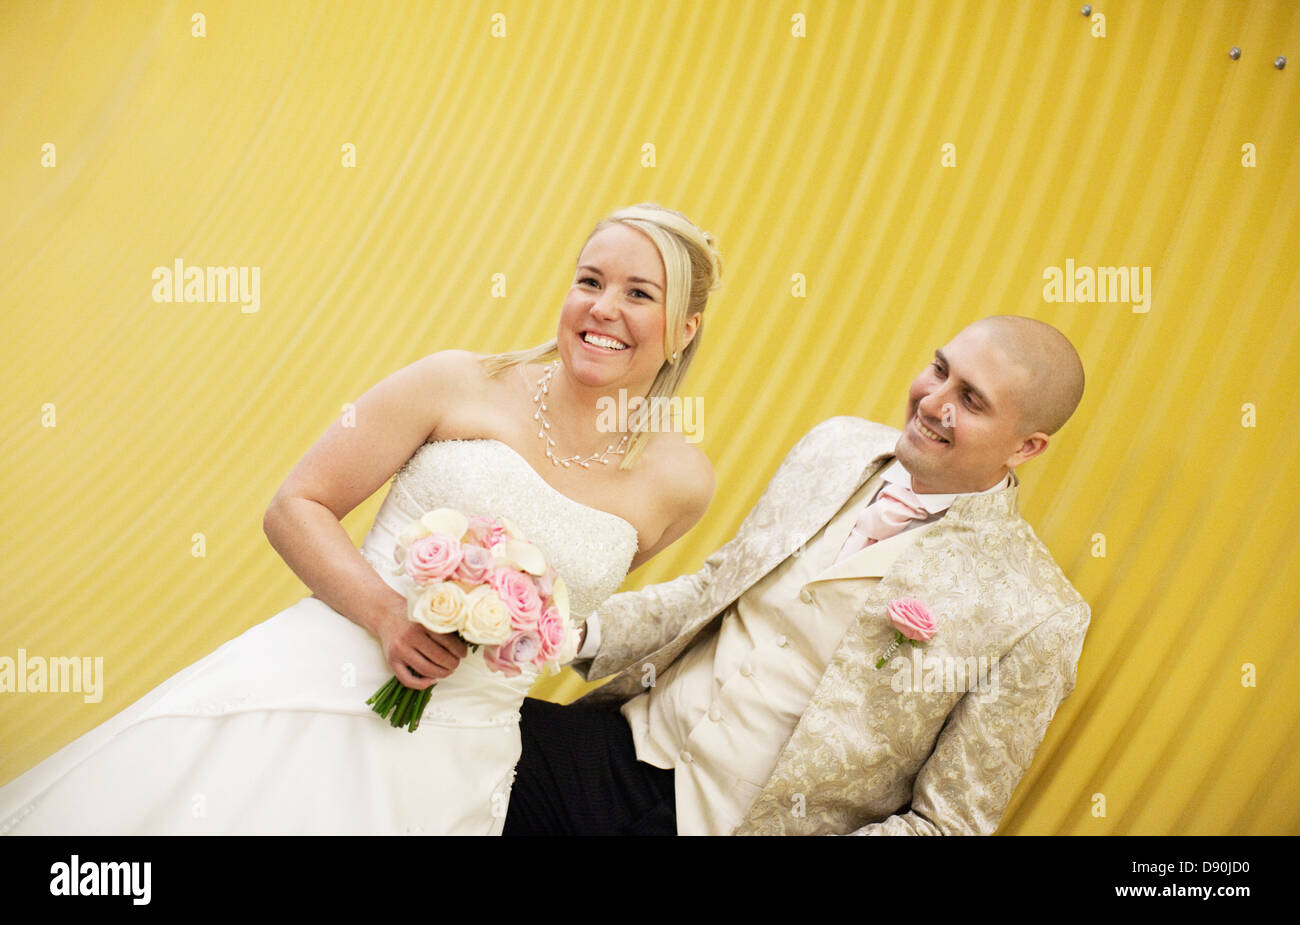 Portrait of bride and groom laughing Stock Photo